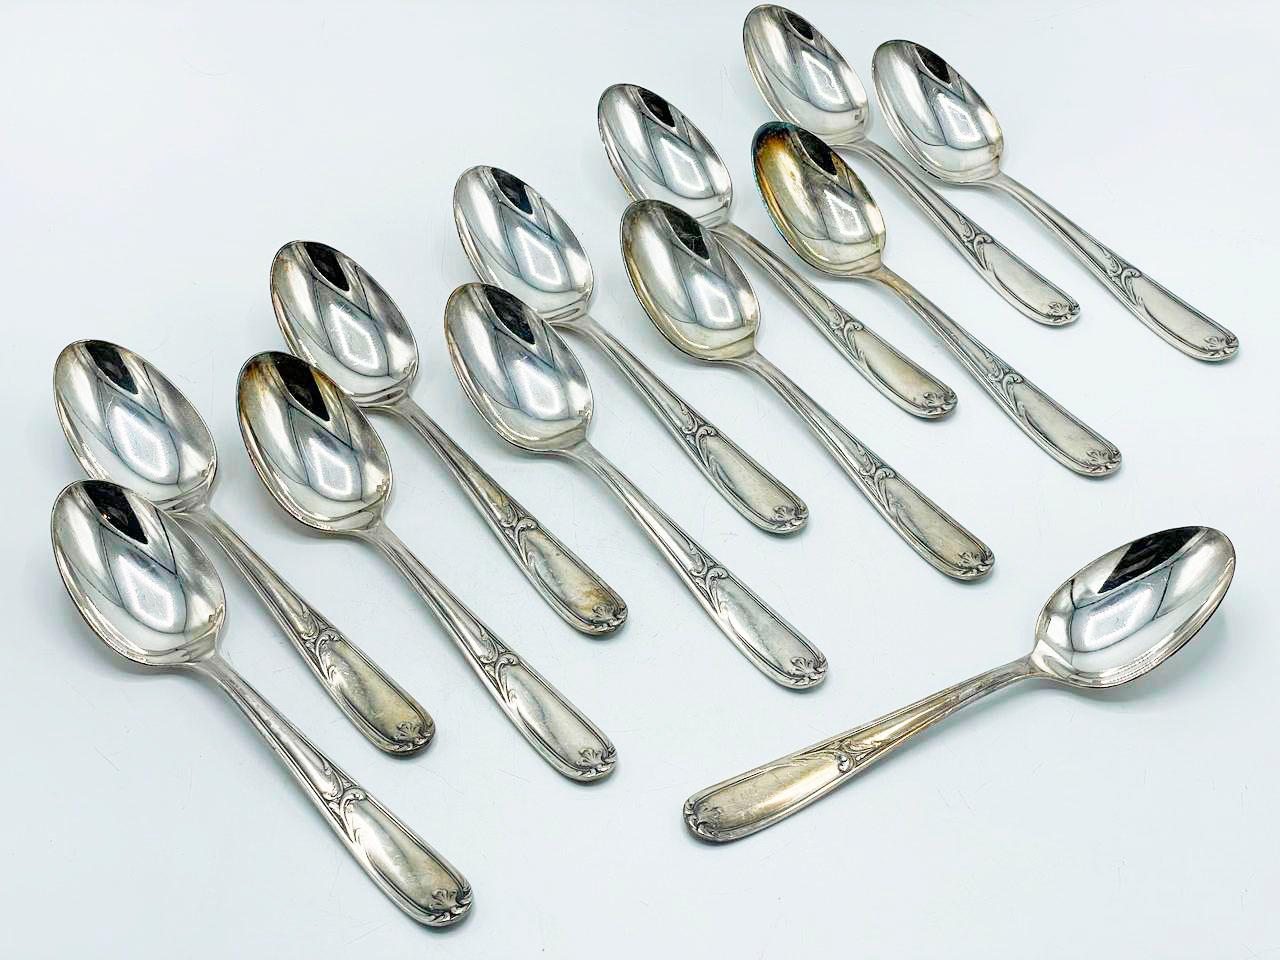 Christofle Made in Argentina, Flatware art nouveau in Silverplated For Sale 2